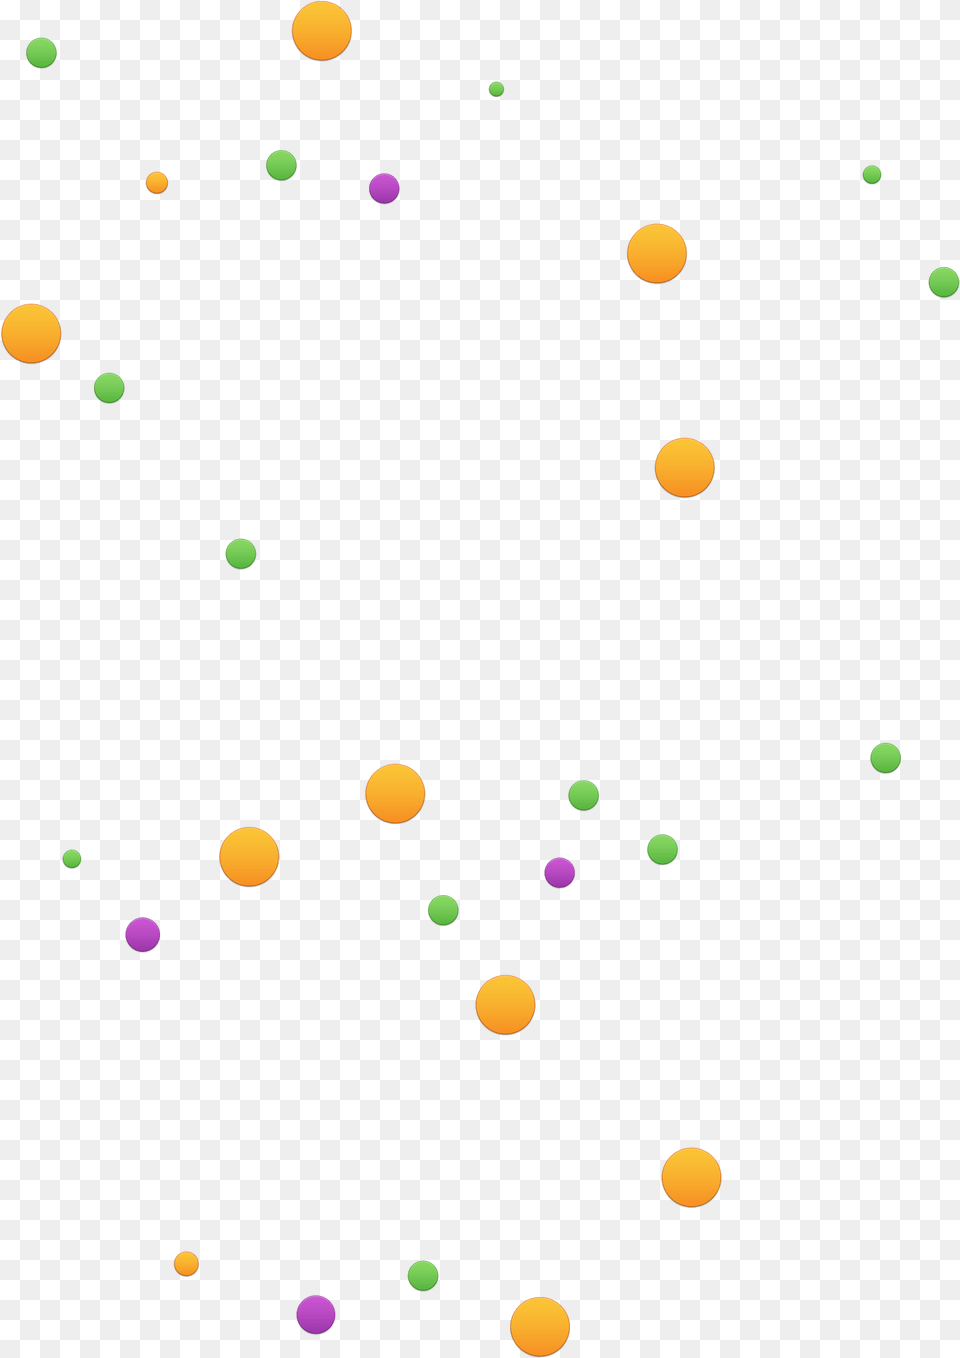 Circle, Paper, Confetti, Astronomy, Outdoors Png